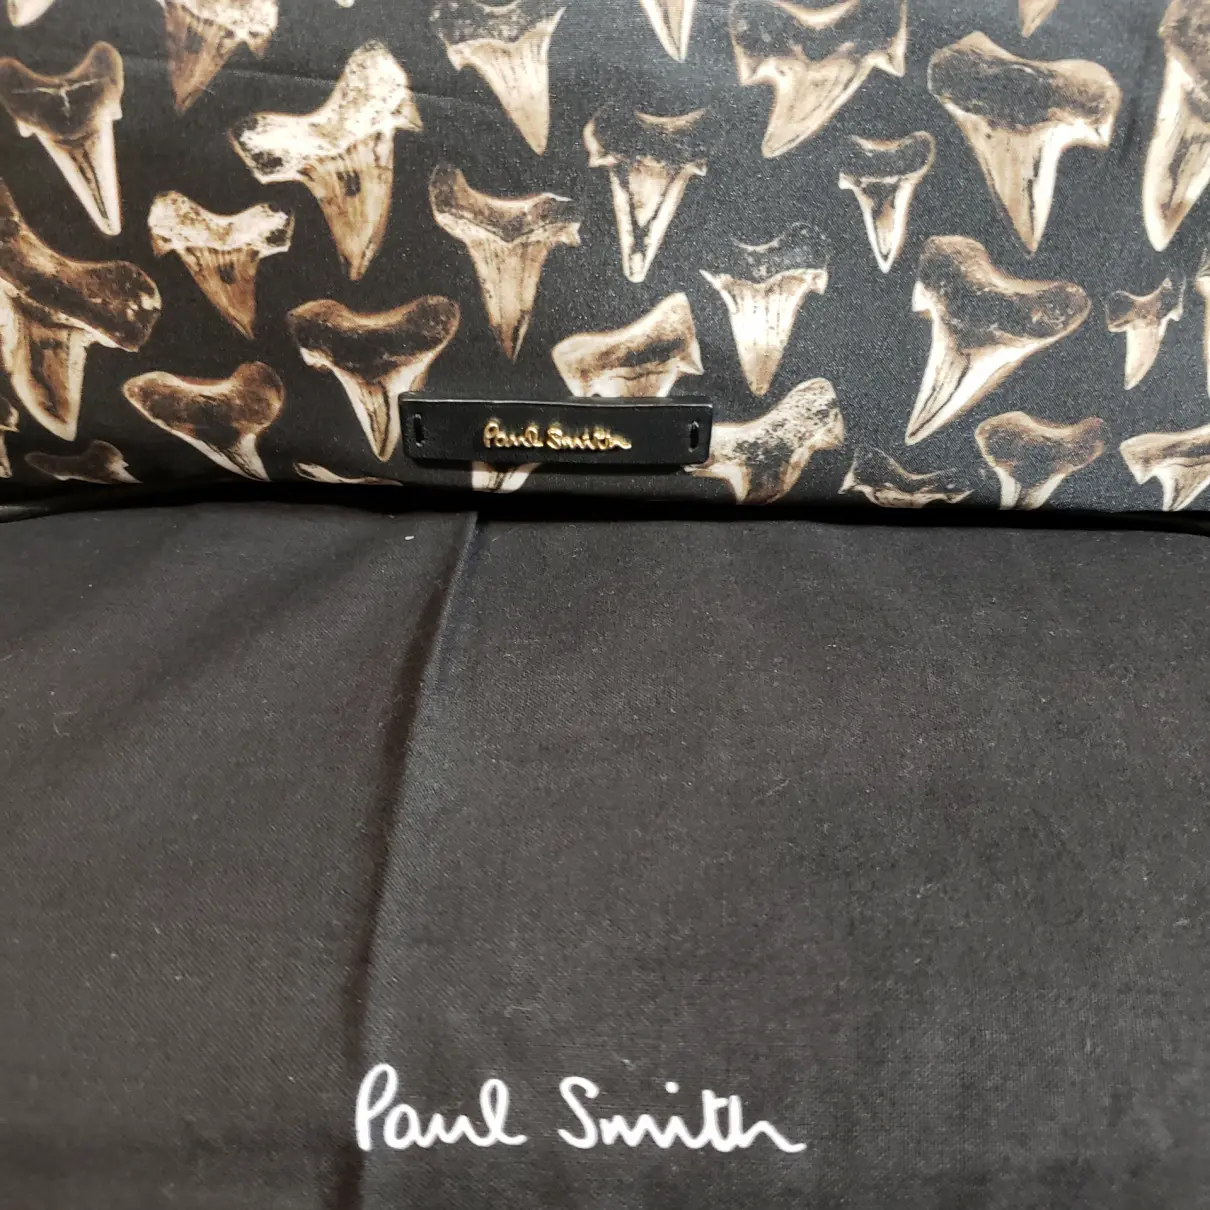 Buy Paul Smith Leather 48h bag online